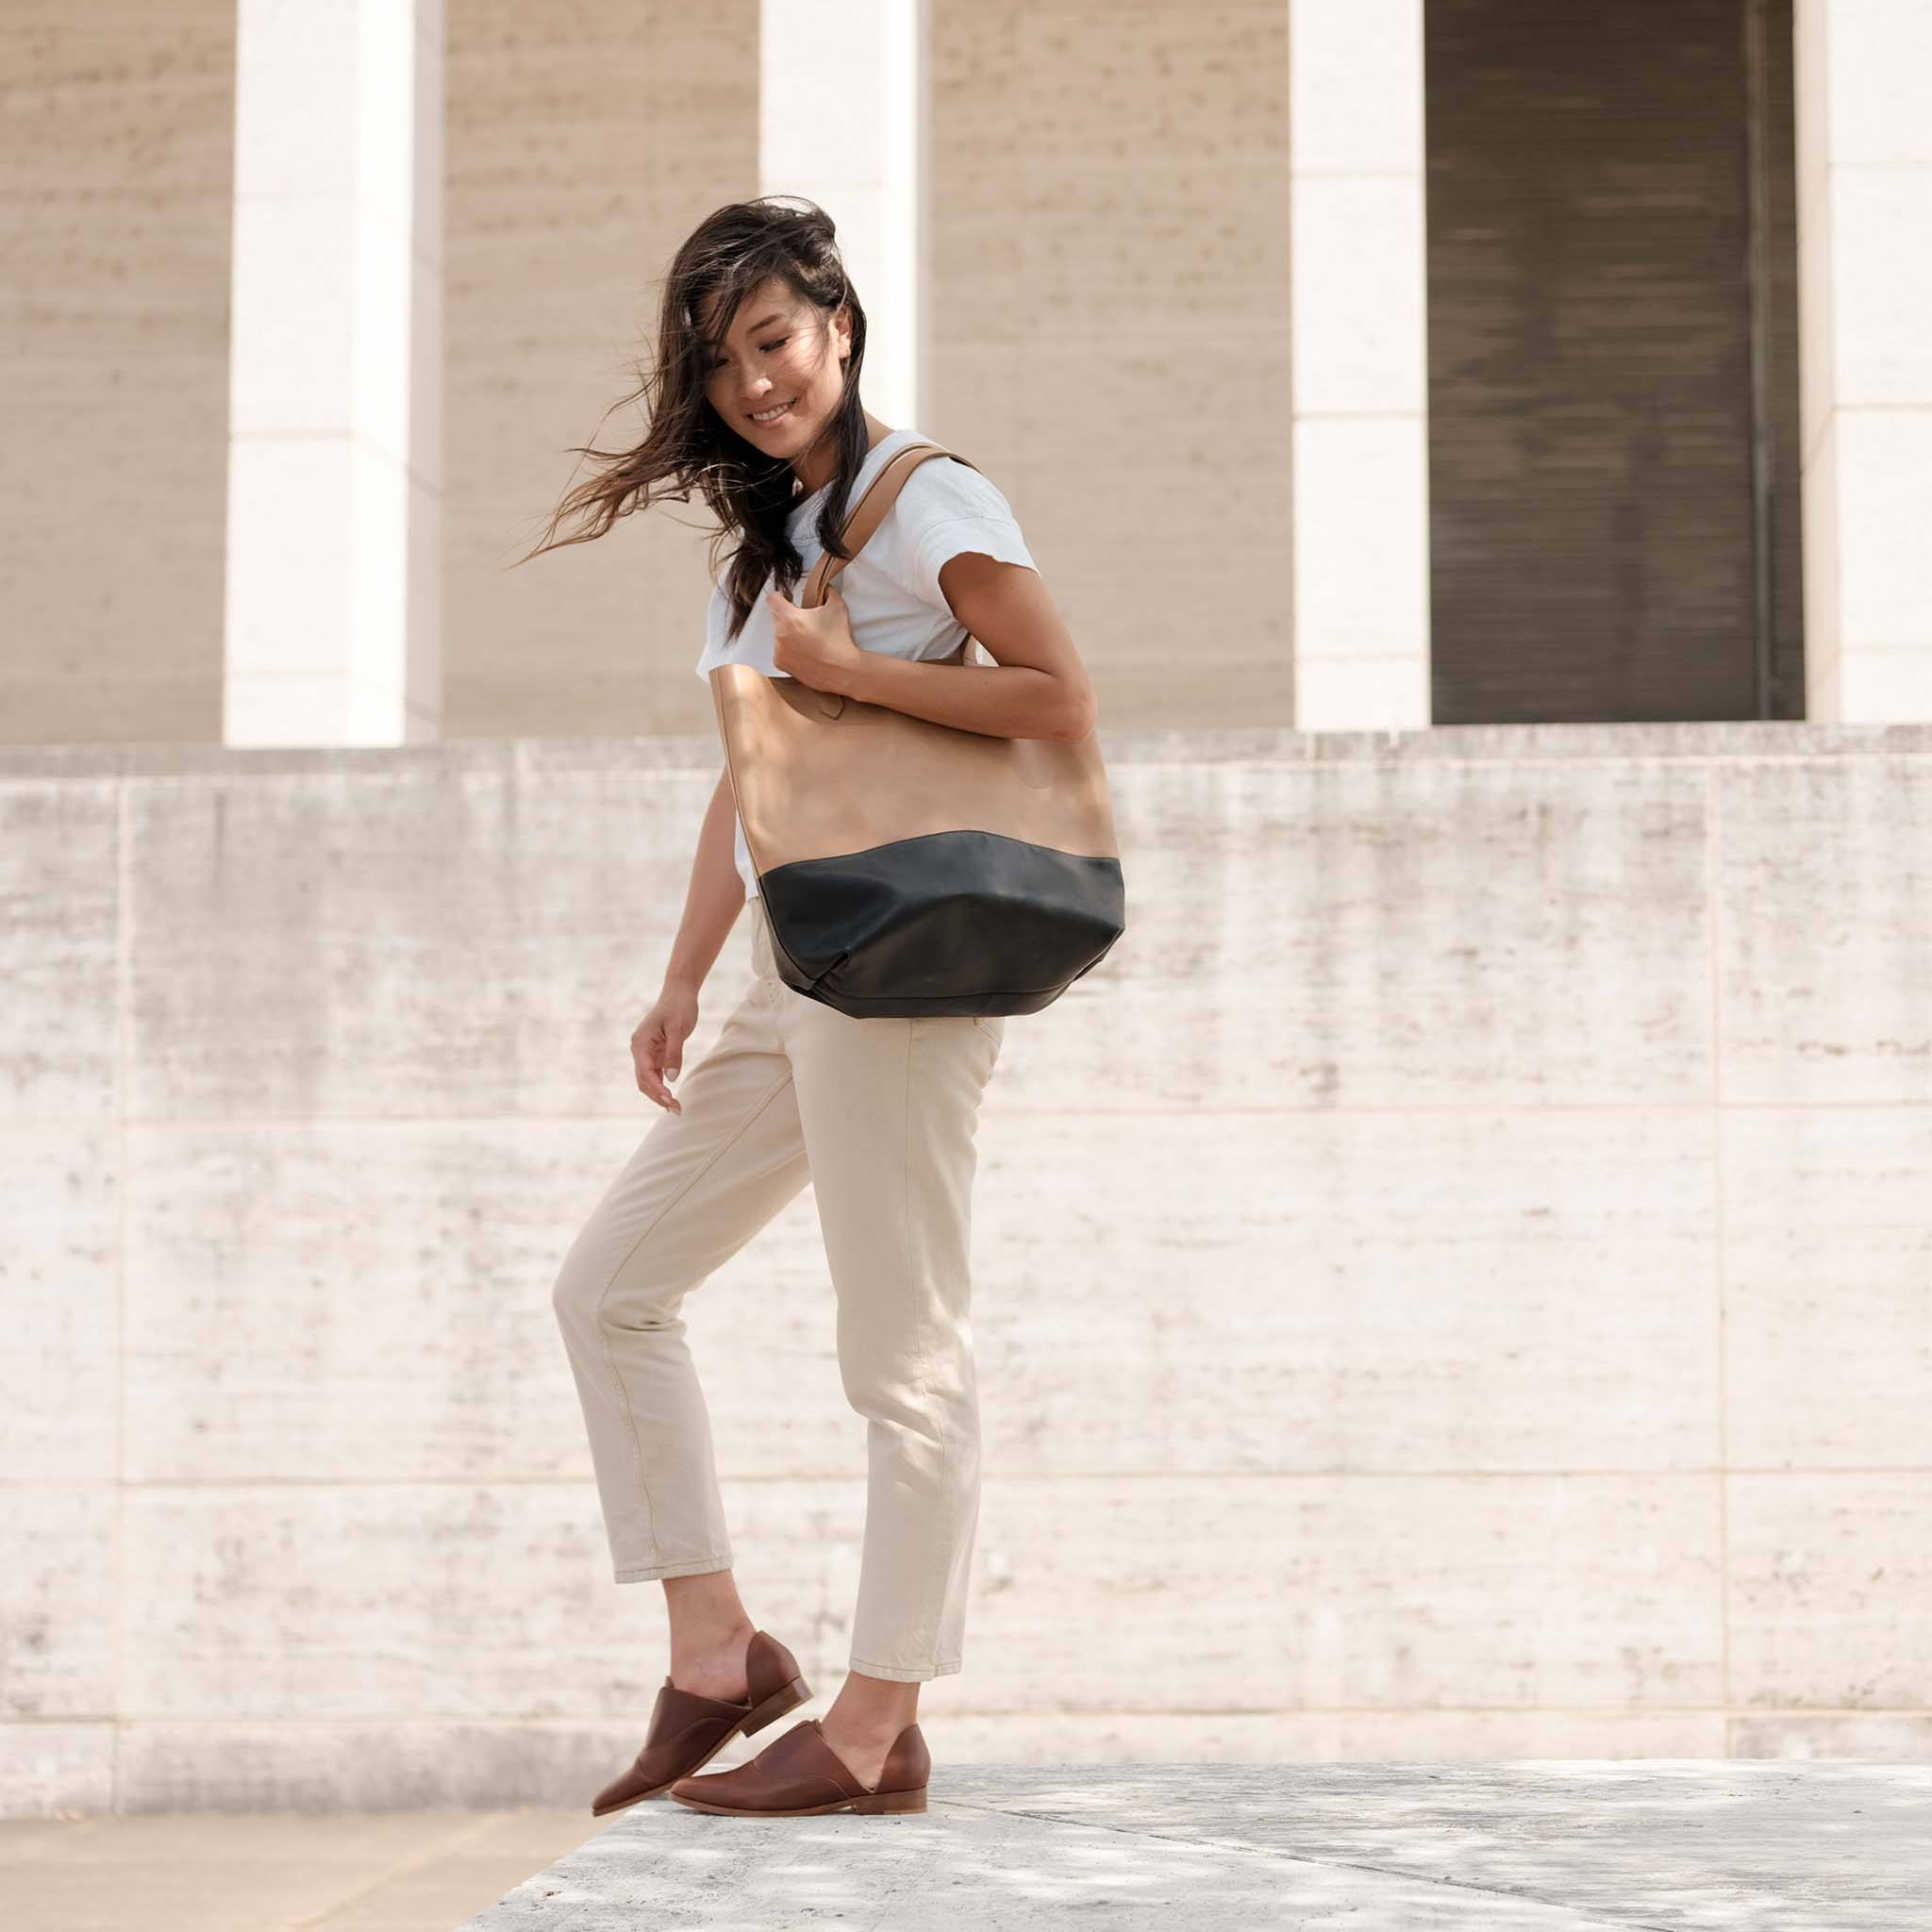 10+ Stylish Work Bags that Fit a Laptop - FROM LUXE WITH LOVE